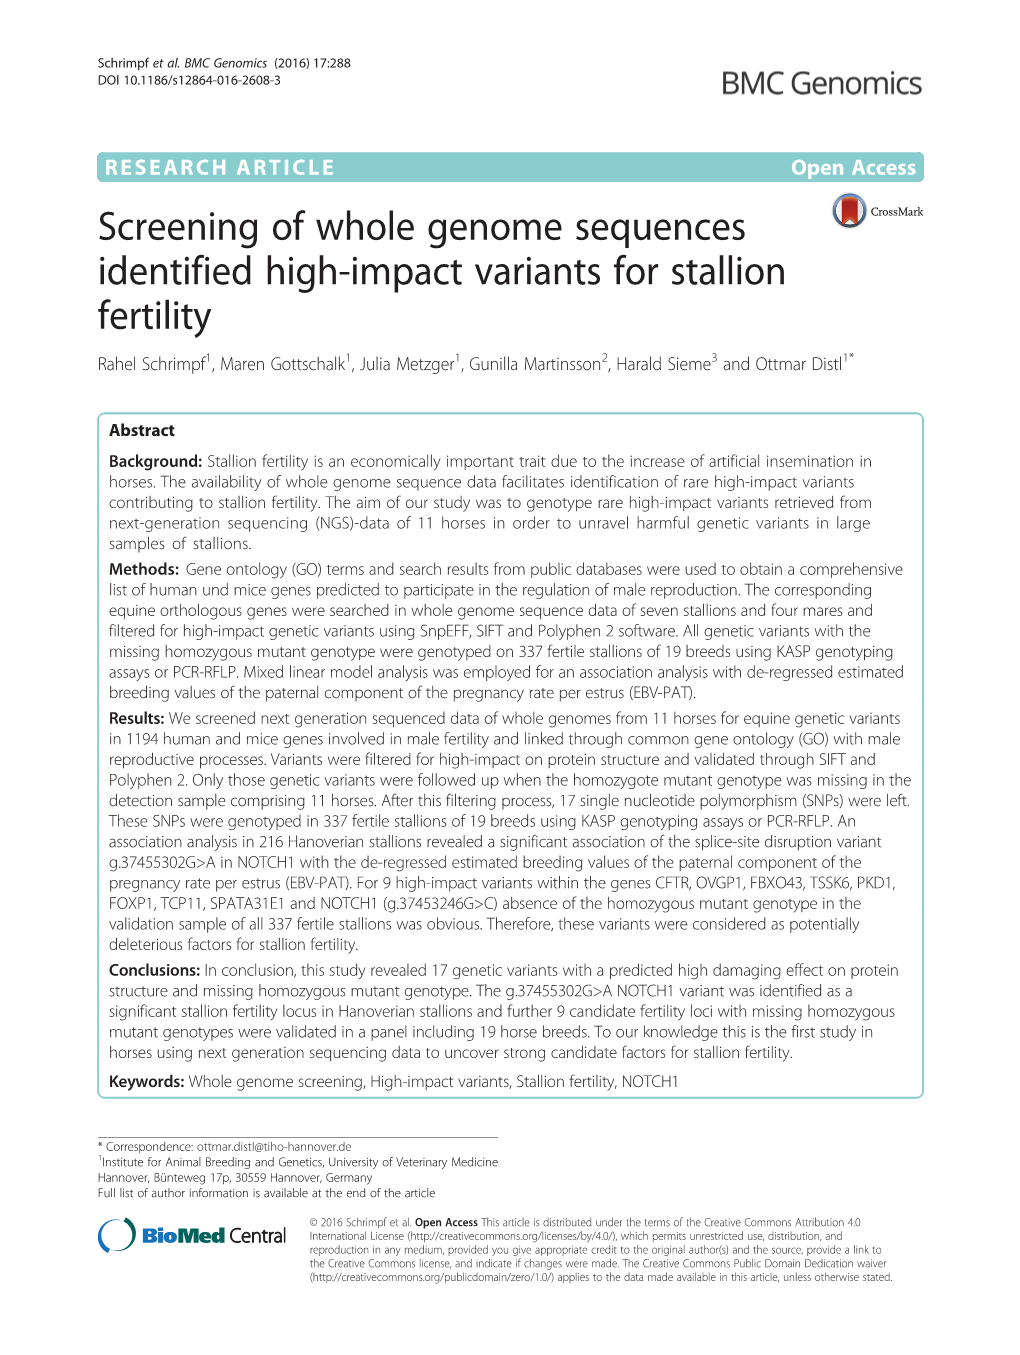 Screening of Whole Genome Sequences Identified High-Impact